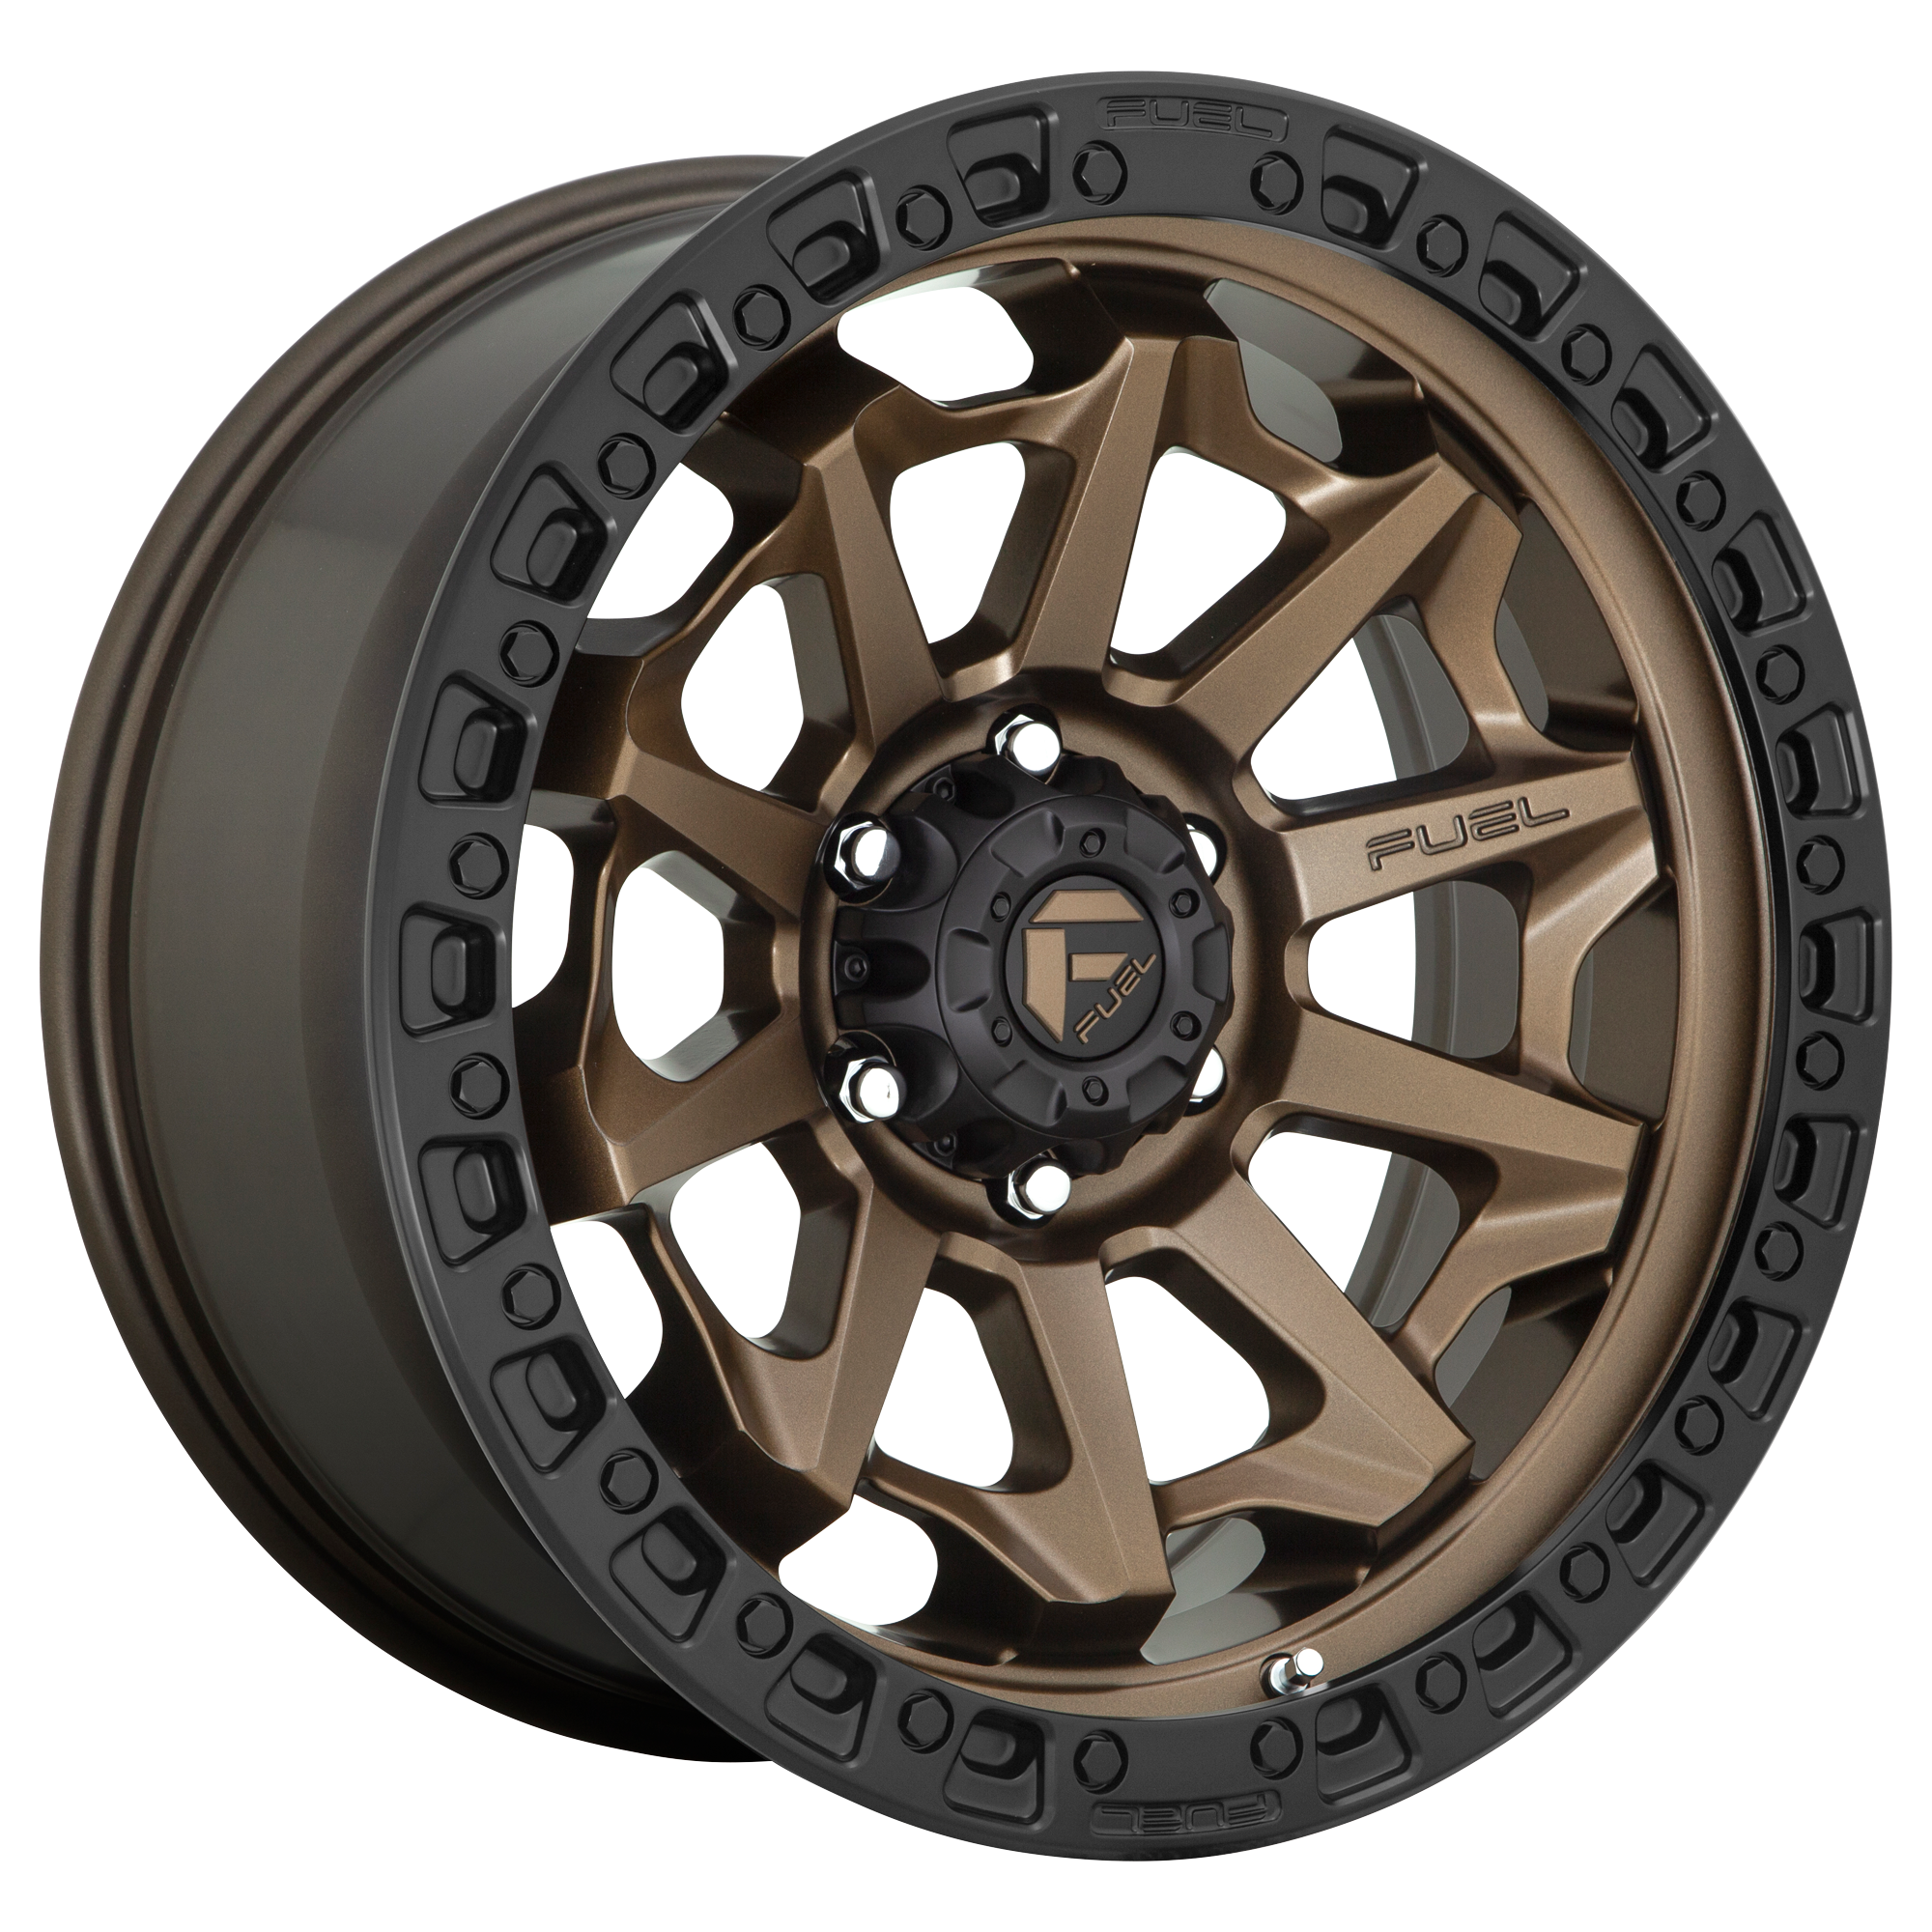 COVERT 18x9 5x127.00 MATTE BRONZE BLACK BEAD RING (20 mm) - Tires and Engine Performance